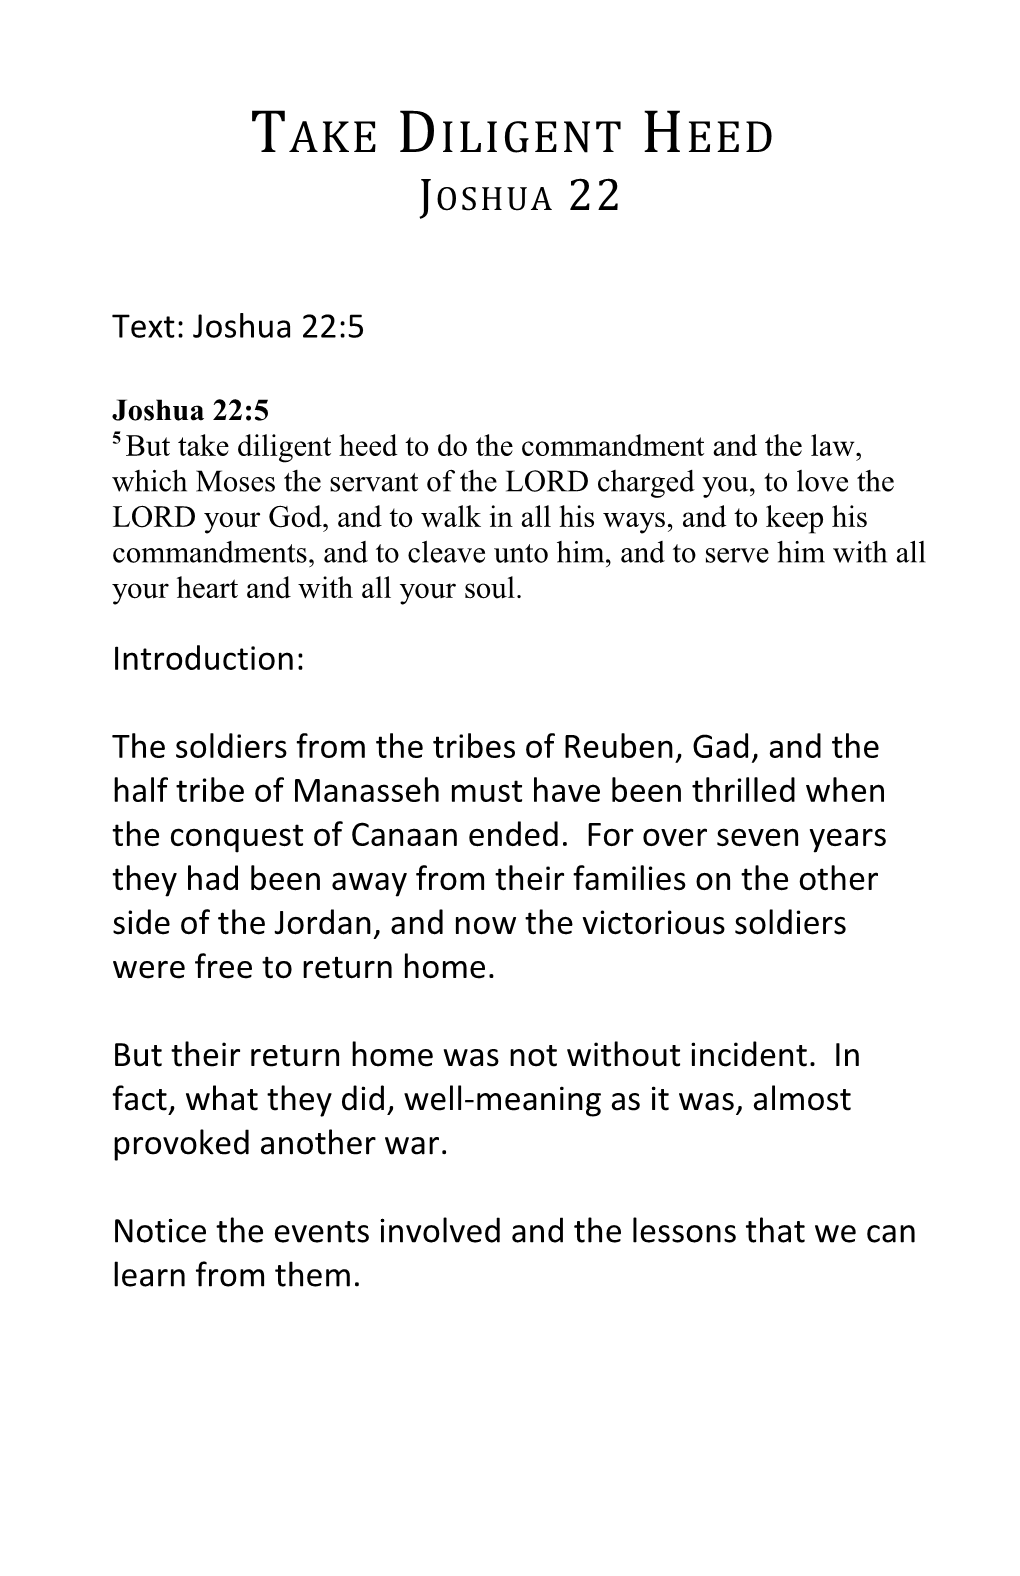 1. Their Honorable Discharge (Joshua 22:1-8)